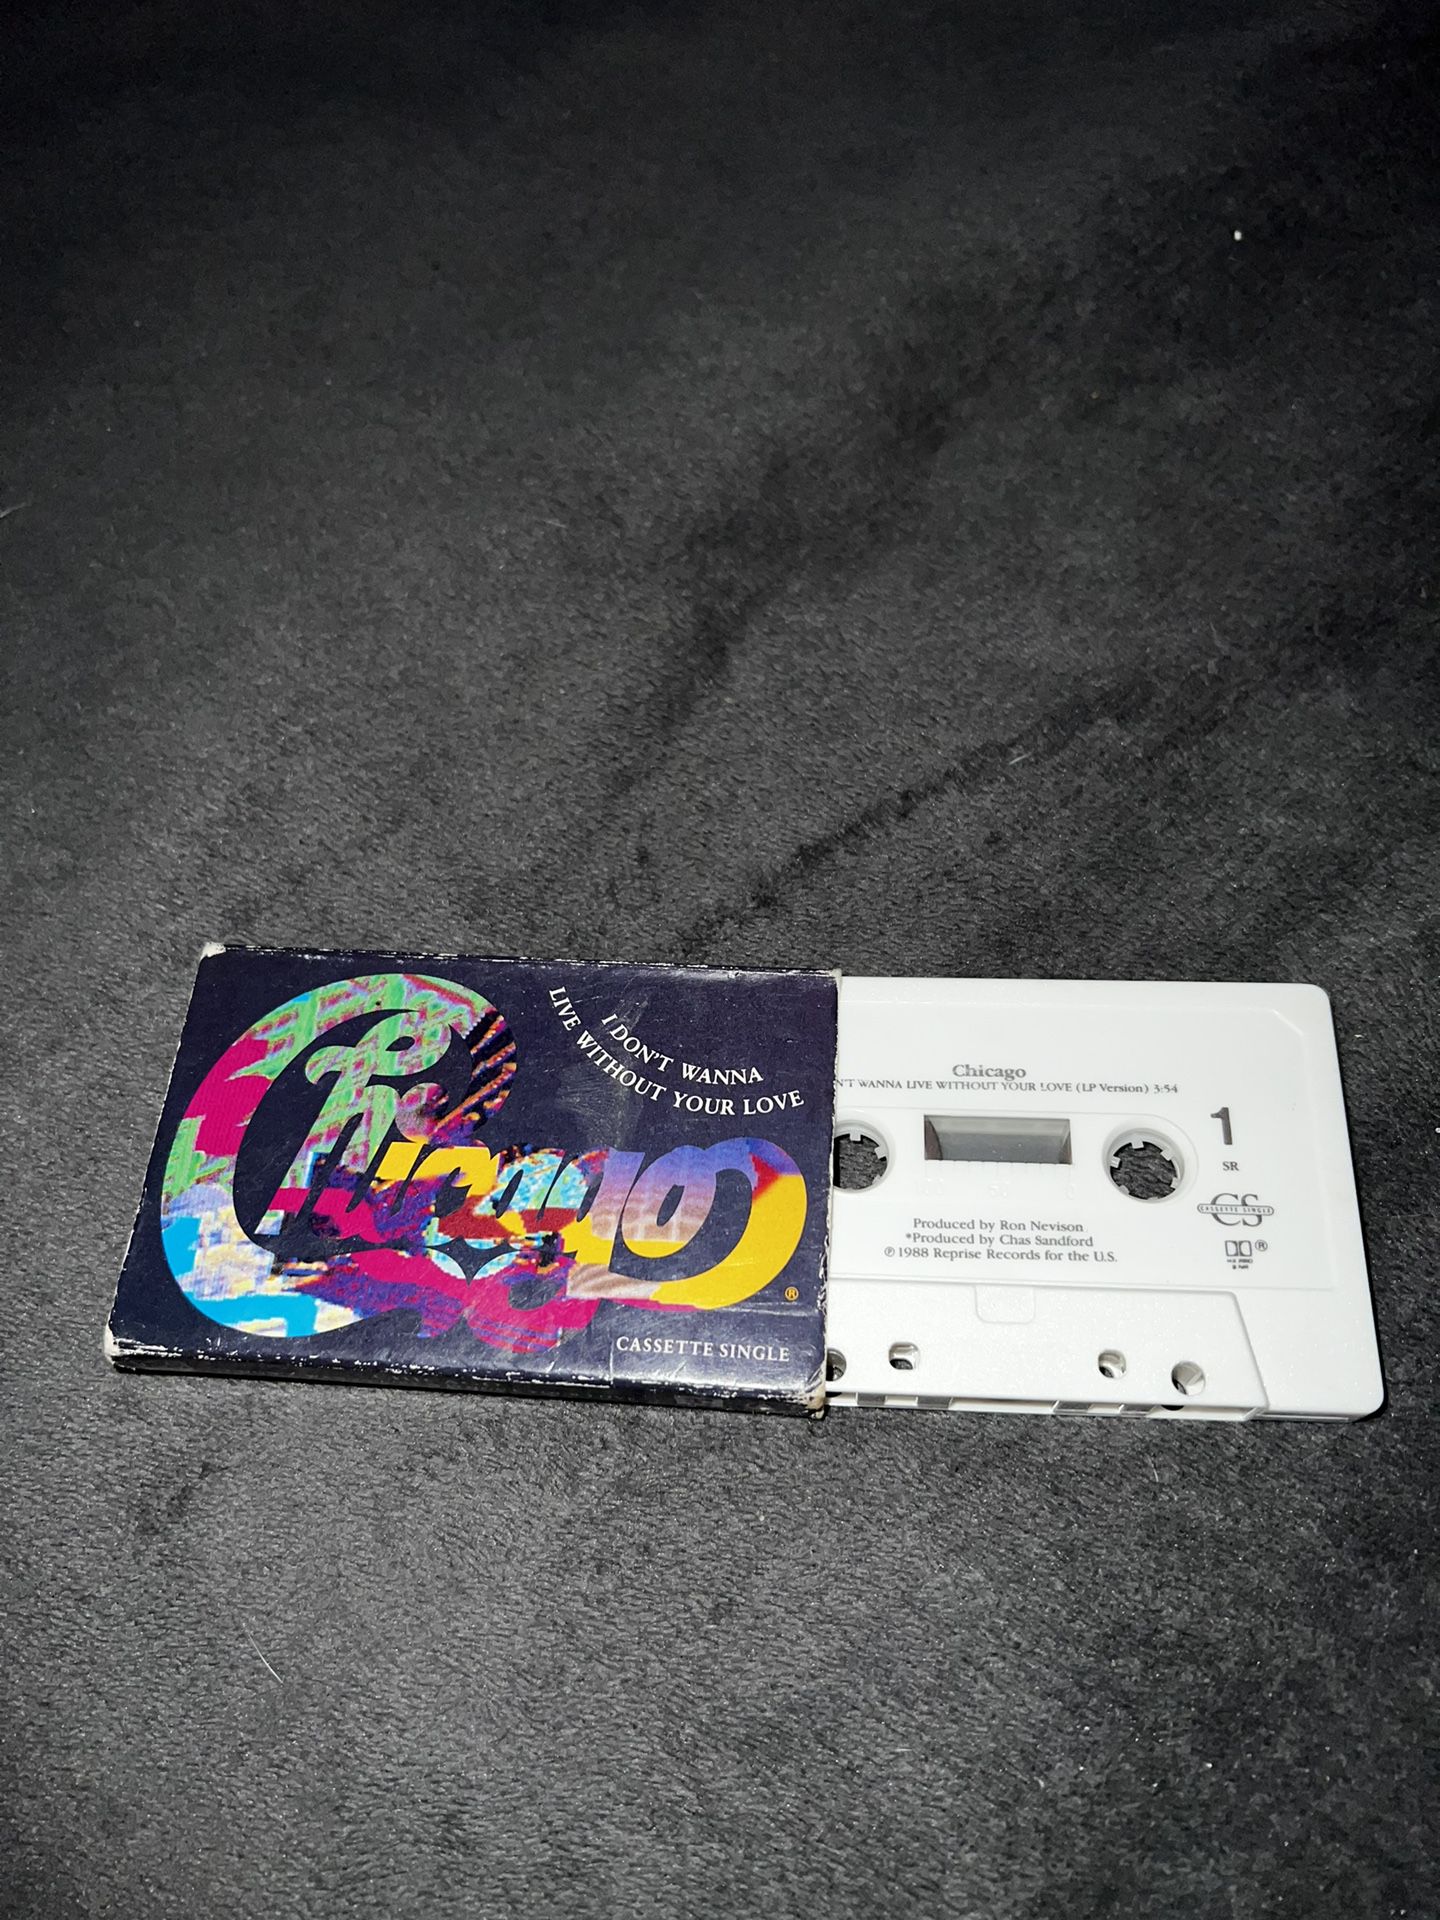 Chicago I Don't Wanna Live Without You Cassette Tape Single w/ I Stand Up